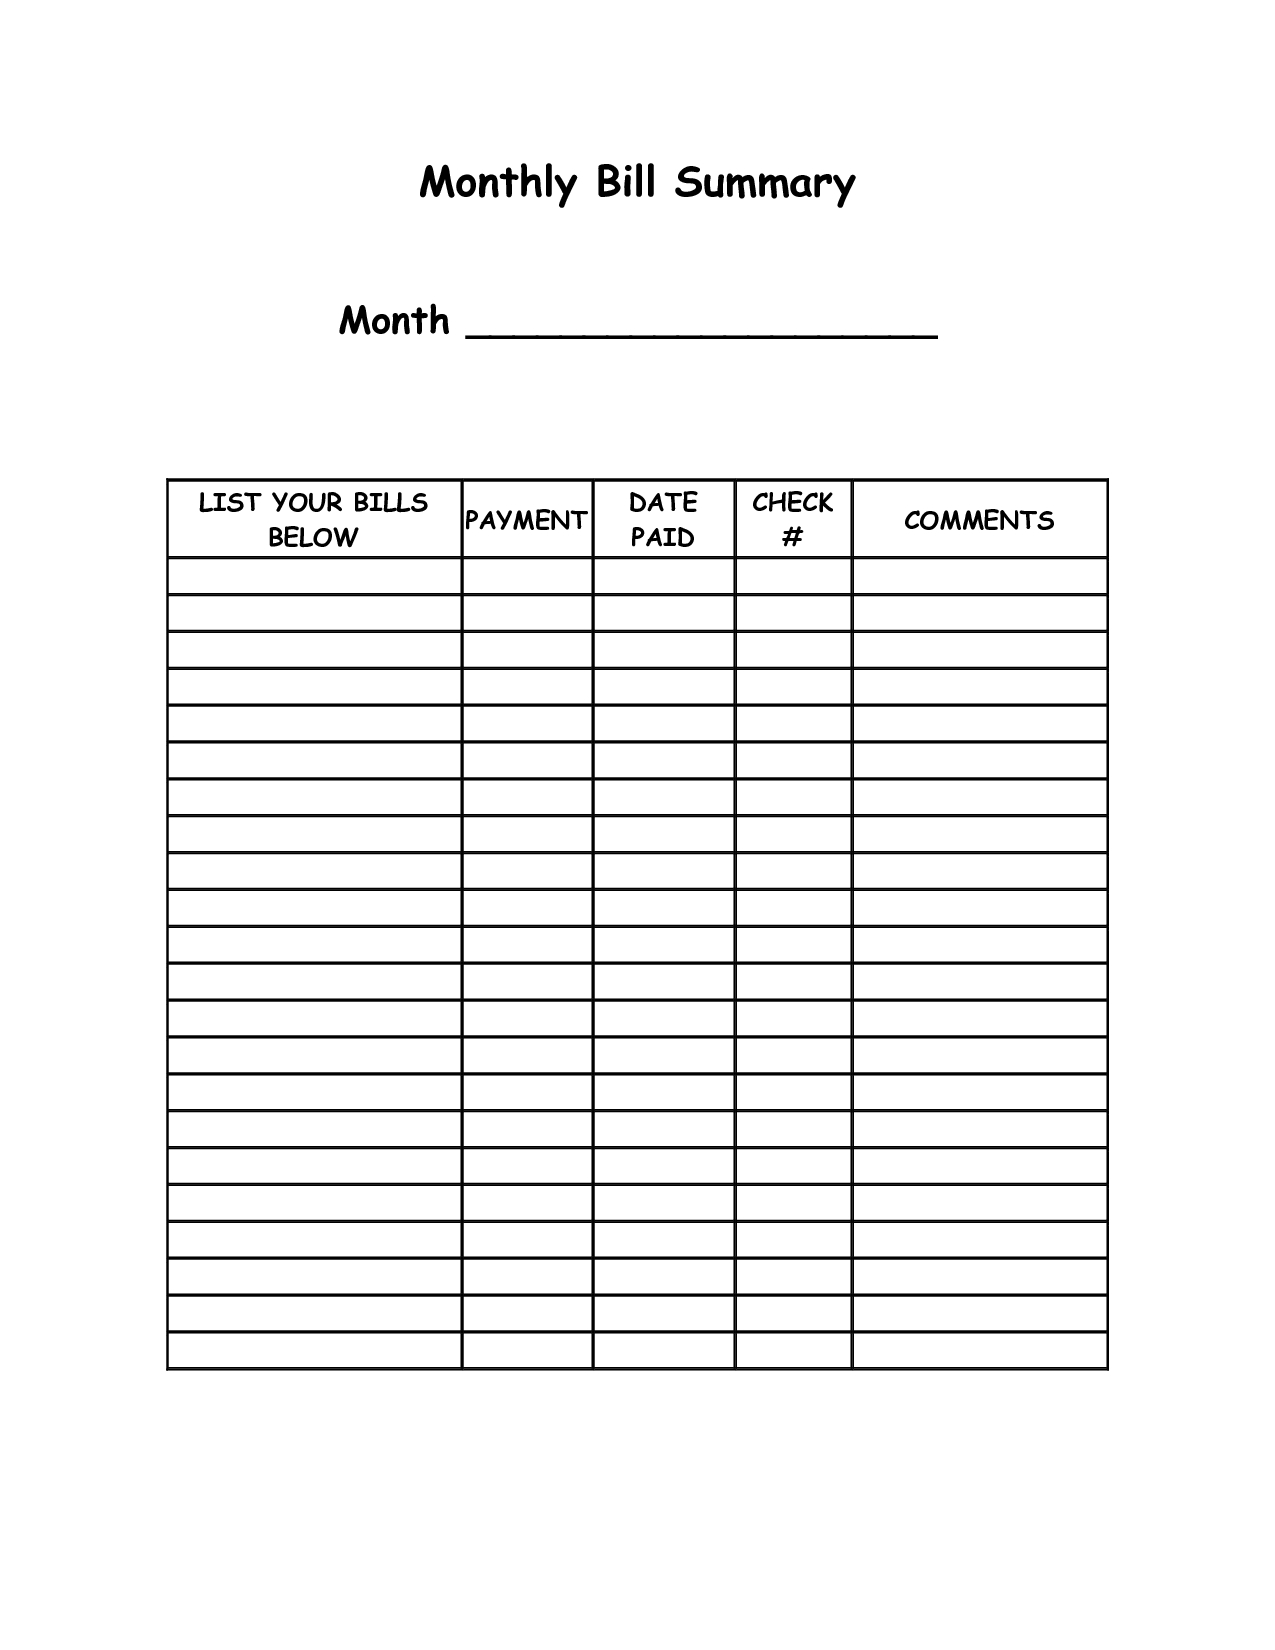 Blank Bill Payment Organizer | Monthly Bill Summary - Doc | Cats pertaining to Monthly Bill Bill Checklist With Confirmation Number Column